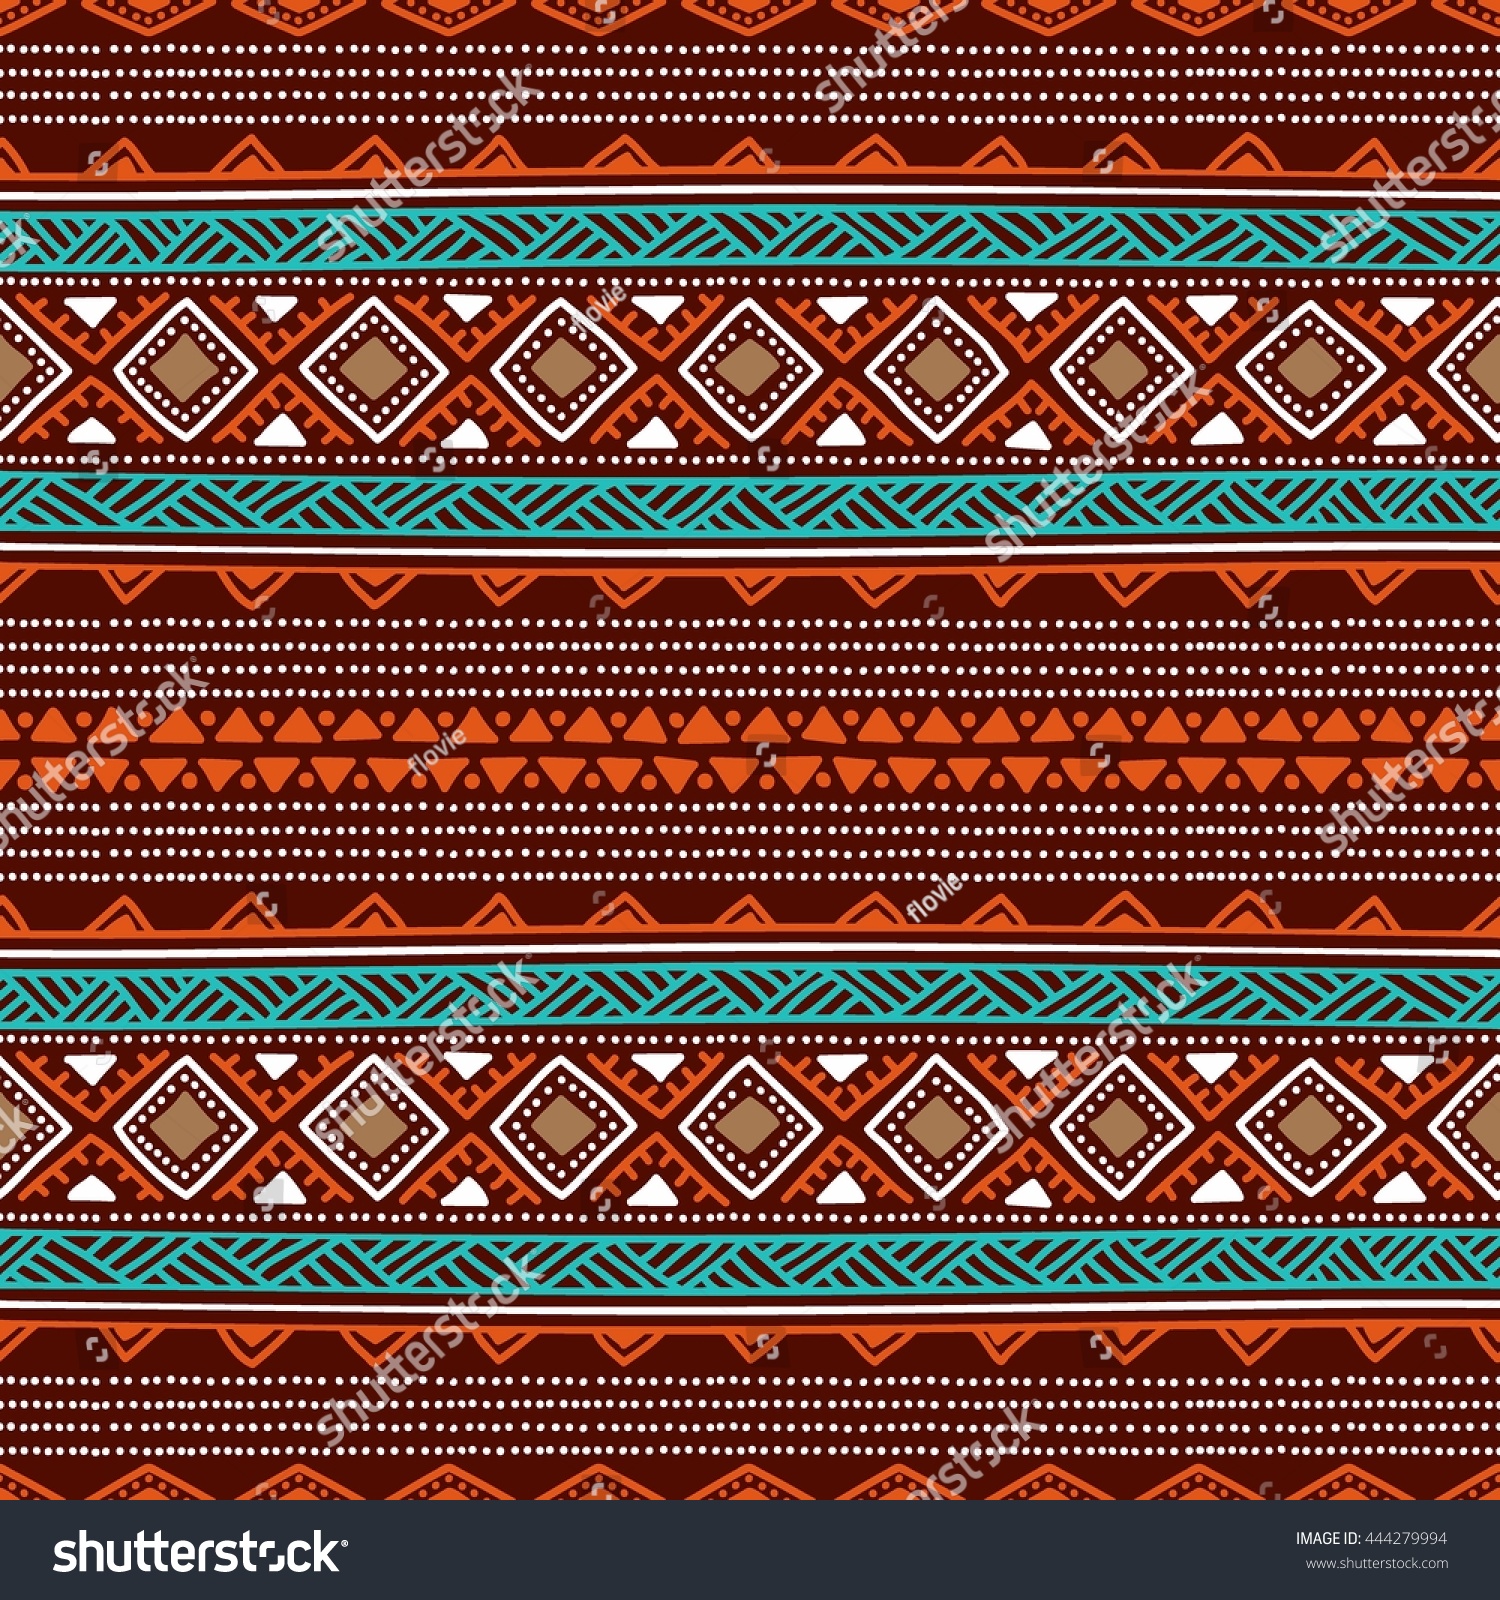 Seamless Ethnic Background Striped Wallpaper Handdrawn Stock Vector